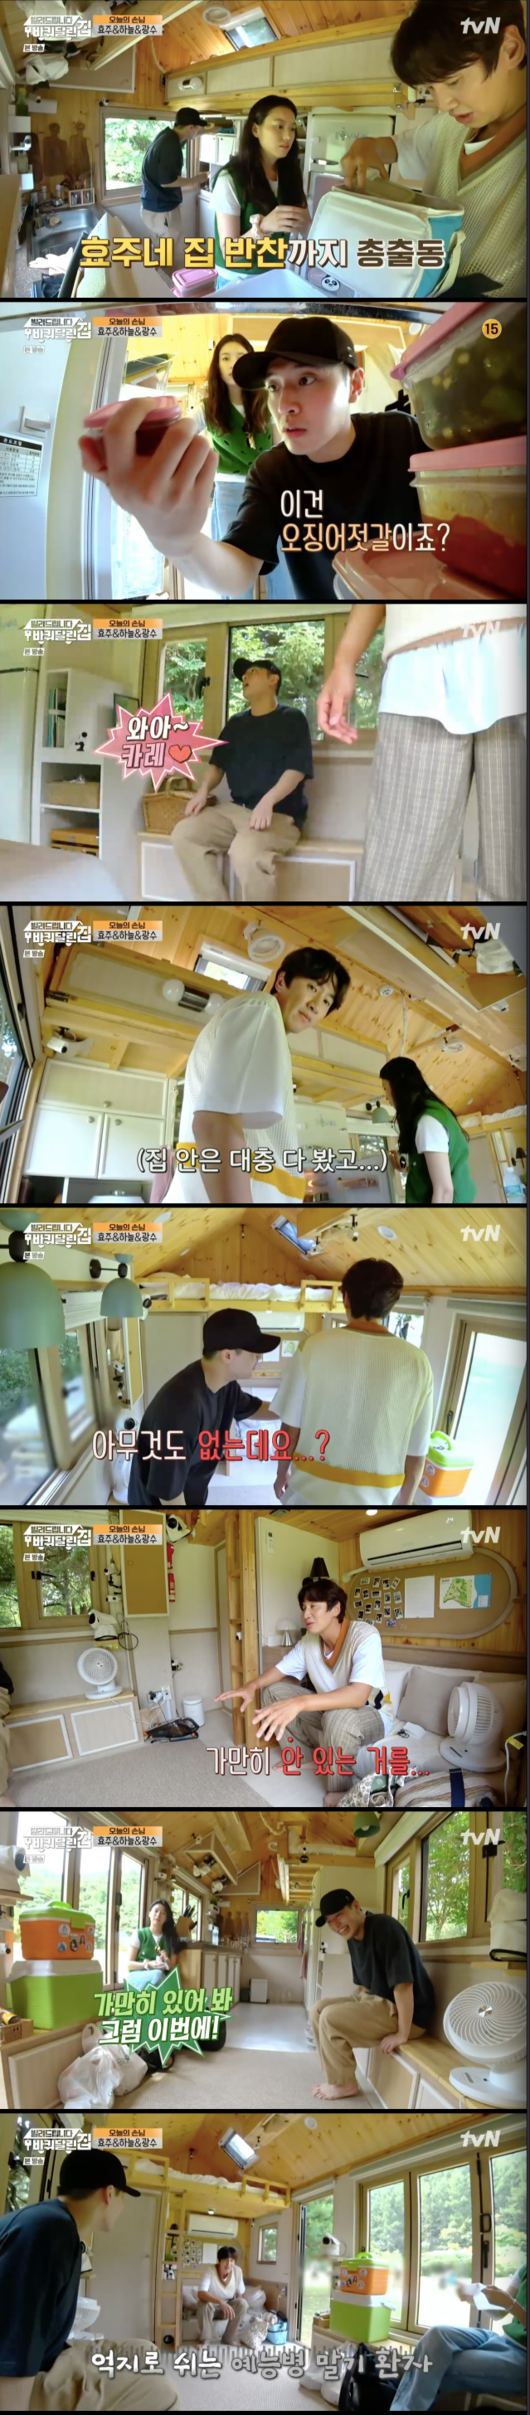 TVN I will rent a wheeled house Lee Kwang-soo has Confessions that there is a aftereffect of Running Man.Lee Kwang-soo, Han Hyo-jooo and Kang Ha-neul appeared as the first guests in the spin-off of tvNs House with Wheels, which was first broadcast at 9 pm on the 13th.The three met through the movie The Pirate Movie. The three people were thrilled to see Wheels edit.Han Hyo-jooo opened the door with his keys and looked inside the car, and Han Hyo-jooo said, Its so good, its air-conditioned inside. Then he said, I brought the ice box.Im going to bake meat in the evening. My mother packed me a side dish.Kang Ha-neul simply bought ramen and tuna cans, and he was embarrassed that he had no side dishes at home.The three men began to explore the interior in earnest. Han Hyo-jooo found a letter left by the landlord.He explained, It is our home to keep our guests from moving, but those who come today are those who rent a wheeled house and have to do everything themselves.The water will be good now, but if you use it, you have to go to the side of the house and put it in yourself.He said, I want everyone to think about the environment here. When you look at the market, use the cart that IU presented you, and when you clean the front yard, use the cleaning tool that Gongbly presented you with.Han Hyo-jooo, who said he was an IU fan, was in charge of Cart, and Kang Ha-neul was in charge of cleaning tools. Han Hyo-jooo said, Thank you to the borrowers.Ill use it as clean as I can, he said.When Han Hyo-jooo wrapped up a side dish, Lee Kwang-soo said, I think I can eat this for a month. Kang Ha-neul asked, We have one night and my sister is here.Han Hyo-jooo said, I will try it if I like it.If you want to make kimchi bean sprout soup, you need to find some shrimp, he said. When he saw the market, he asked him to buy kimchi, bean sprouts, and shrimp.Lee Kwang-soo told Han Hyo-jooo, who is obsessed with shrimp, I am the one who starts to hear others when my story is over.I will buy shrimp right now, he calmed Han Hyo-jooo.Han Hyo-jooo offered curry for lunch menu and Kang Ha-neul and Lee Kwang-soo agreed.Lee Kwang-soo said, Lets look around for something?Cant you just take a little break and go out? said Kang Ha-neul and Han Hyo-jooo, who are beginners of the show.This is a disease, Kang Ha-neul said. Lets take a break.Lee Kwang-soo said, I have been doing it for 11 years. Han Hyo-joo said, Then please stay still.Dont do anything.TVN entertainment I will rent a house with wheels broadcast screen capture